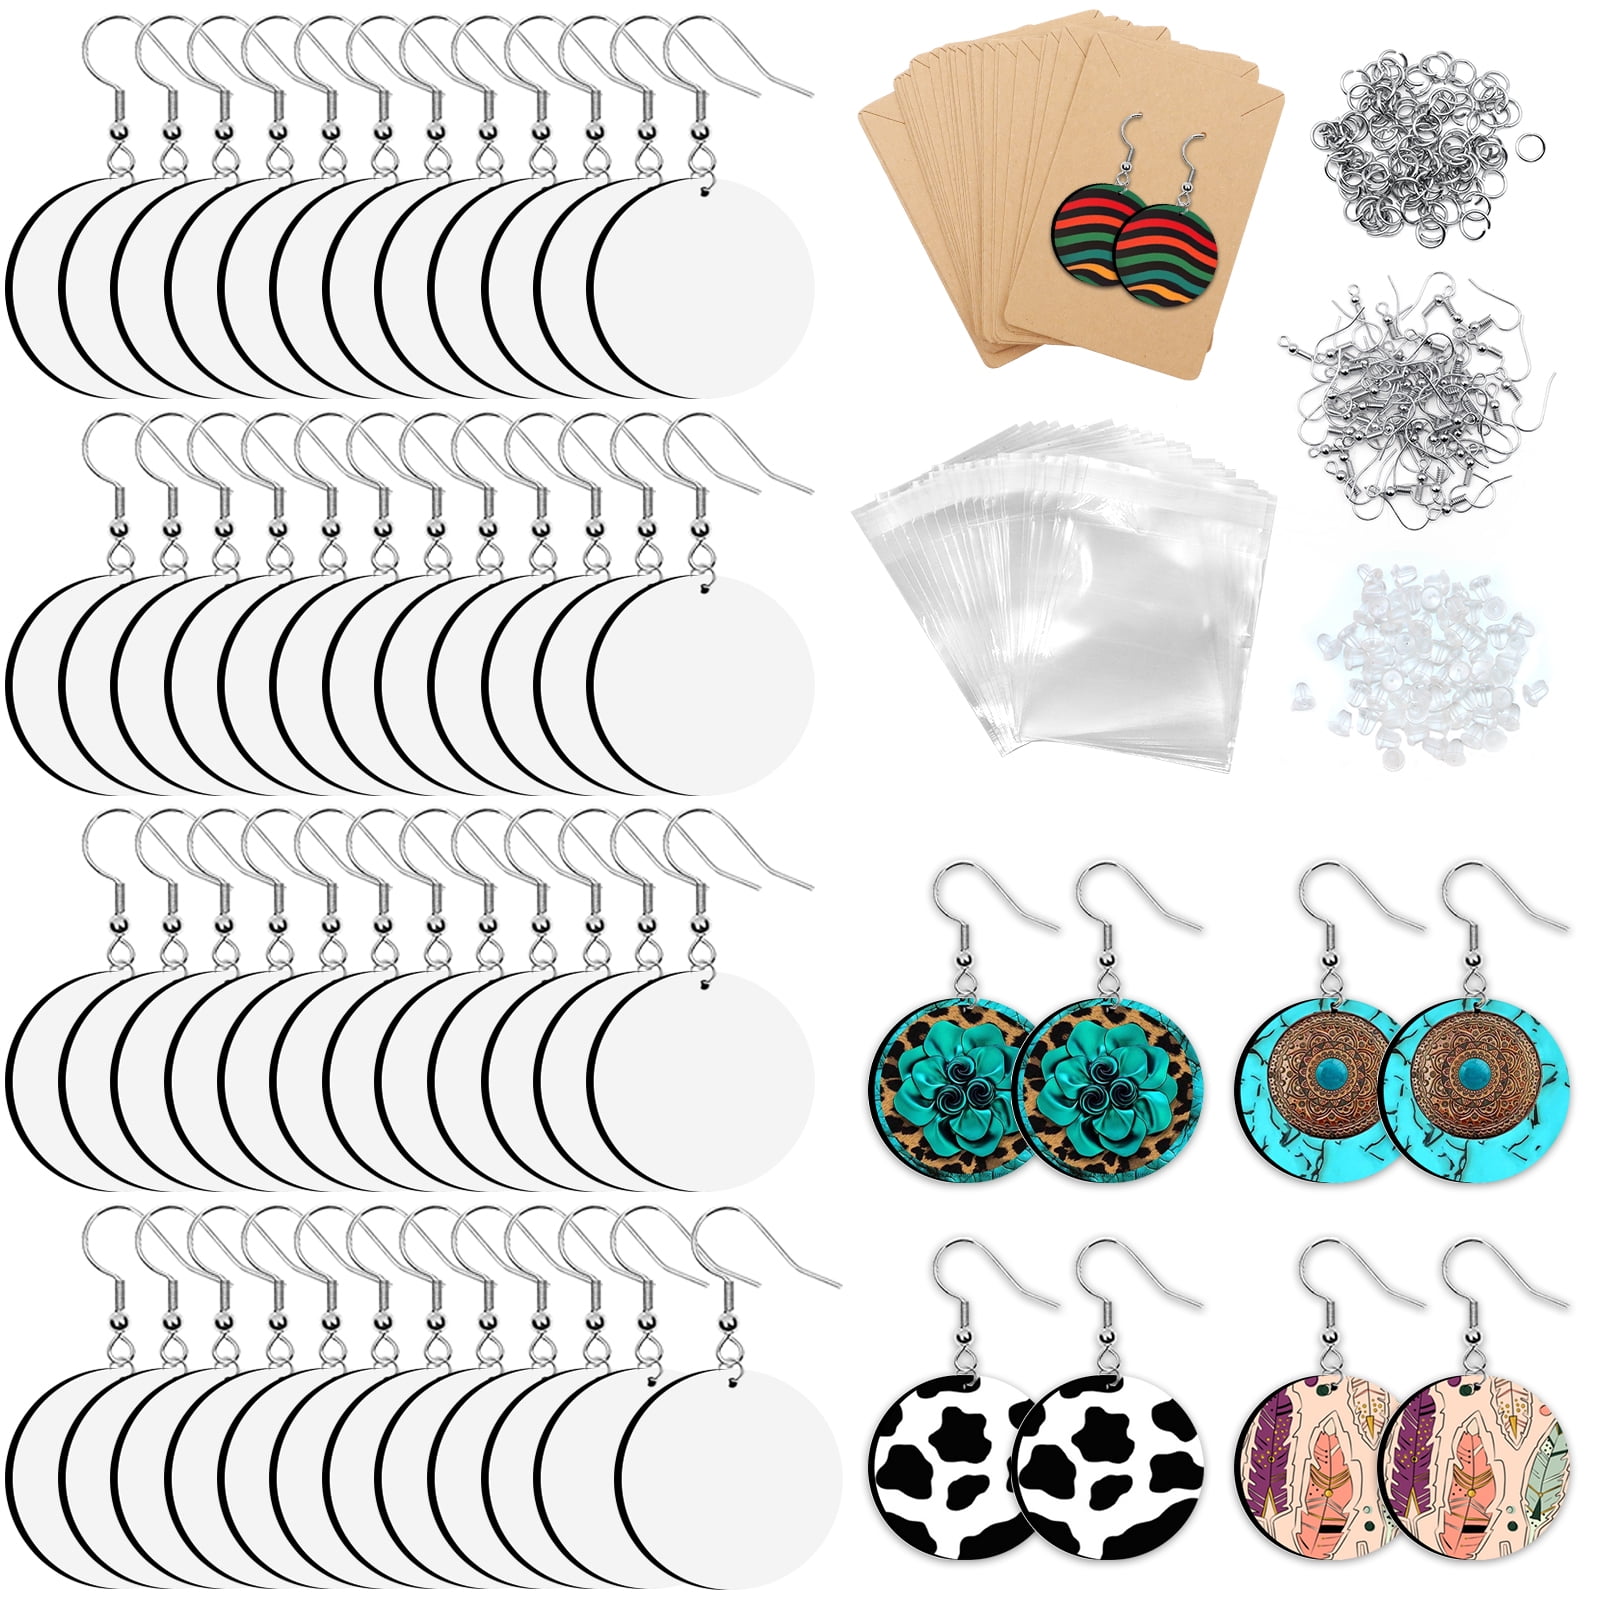 60 Pieces Sublimation Blanks Products, modacraft Sublimation Blank Earrings  with Earring Hooks Jump Rings Ear Plugs Holder Cards Bags for Jewelry DIY  Making